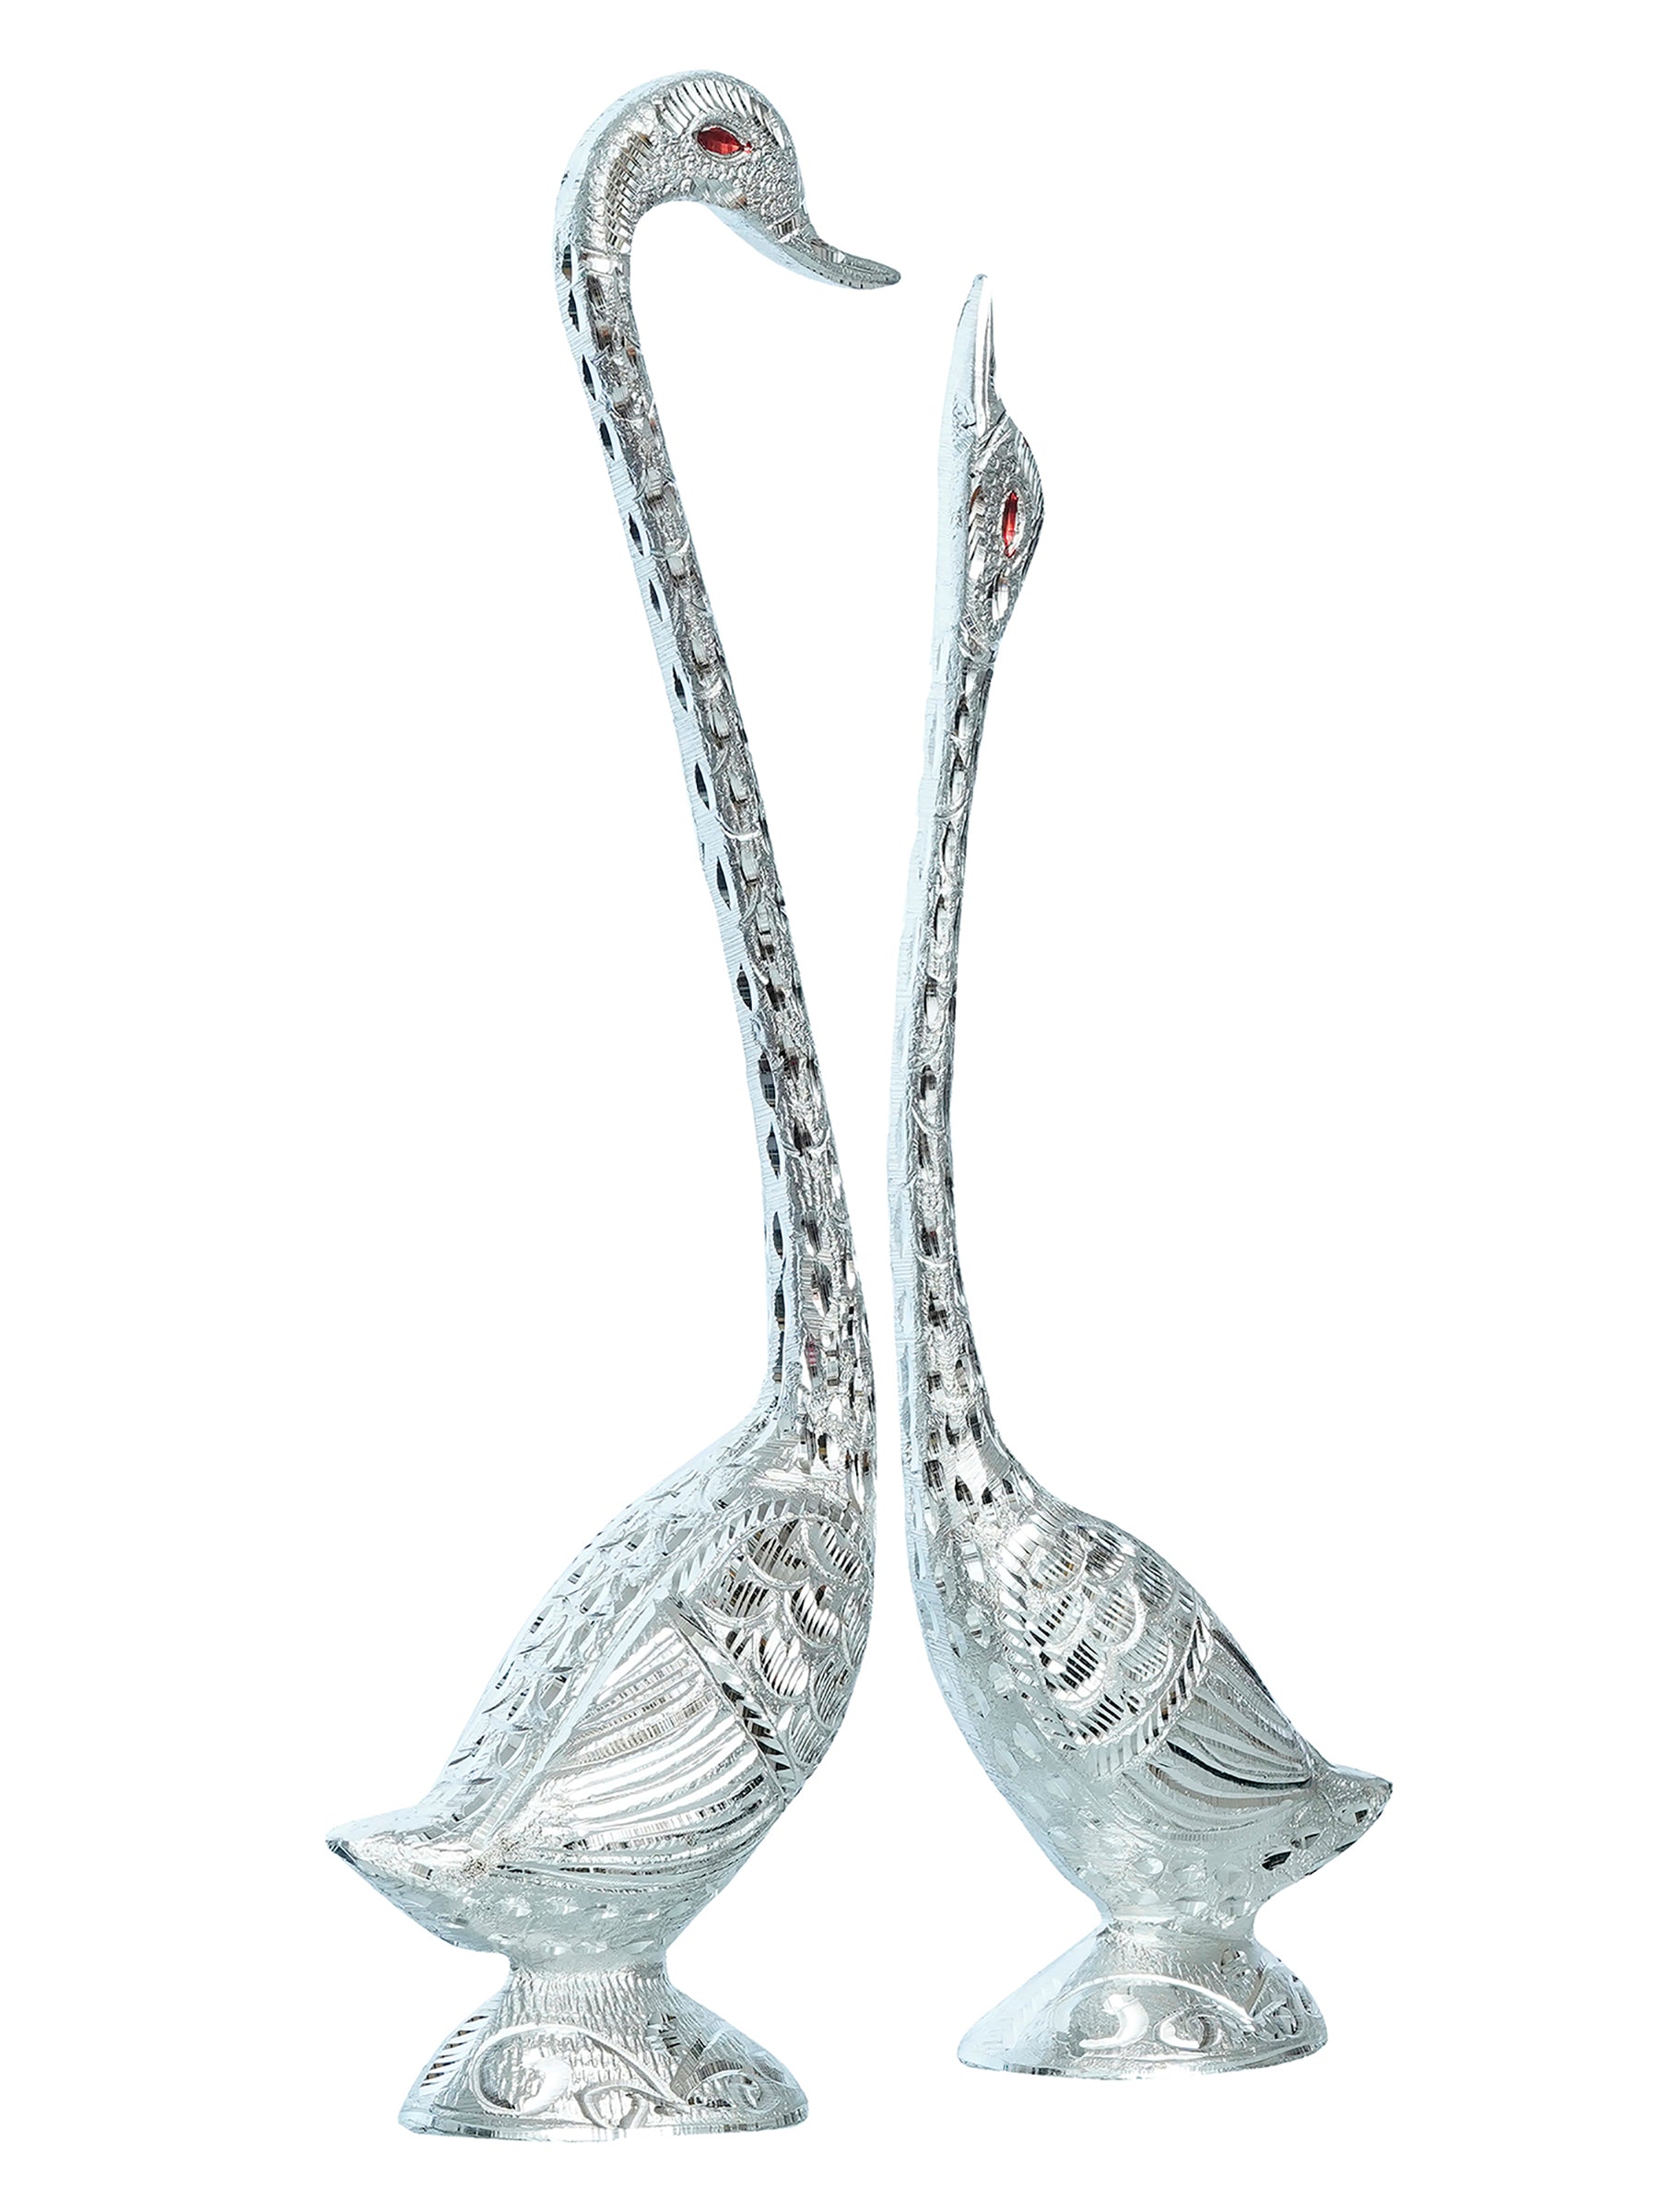 Silver Metal Kissing Swan Couple Handcrafted Decorative showpiece 5